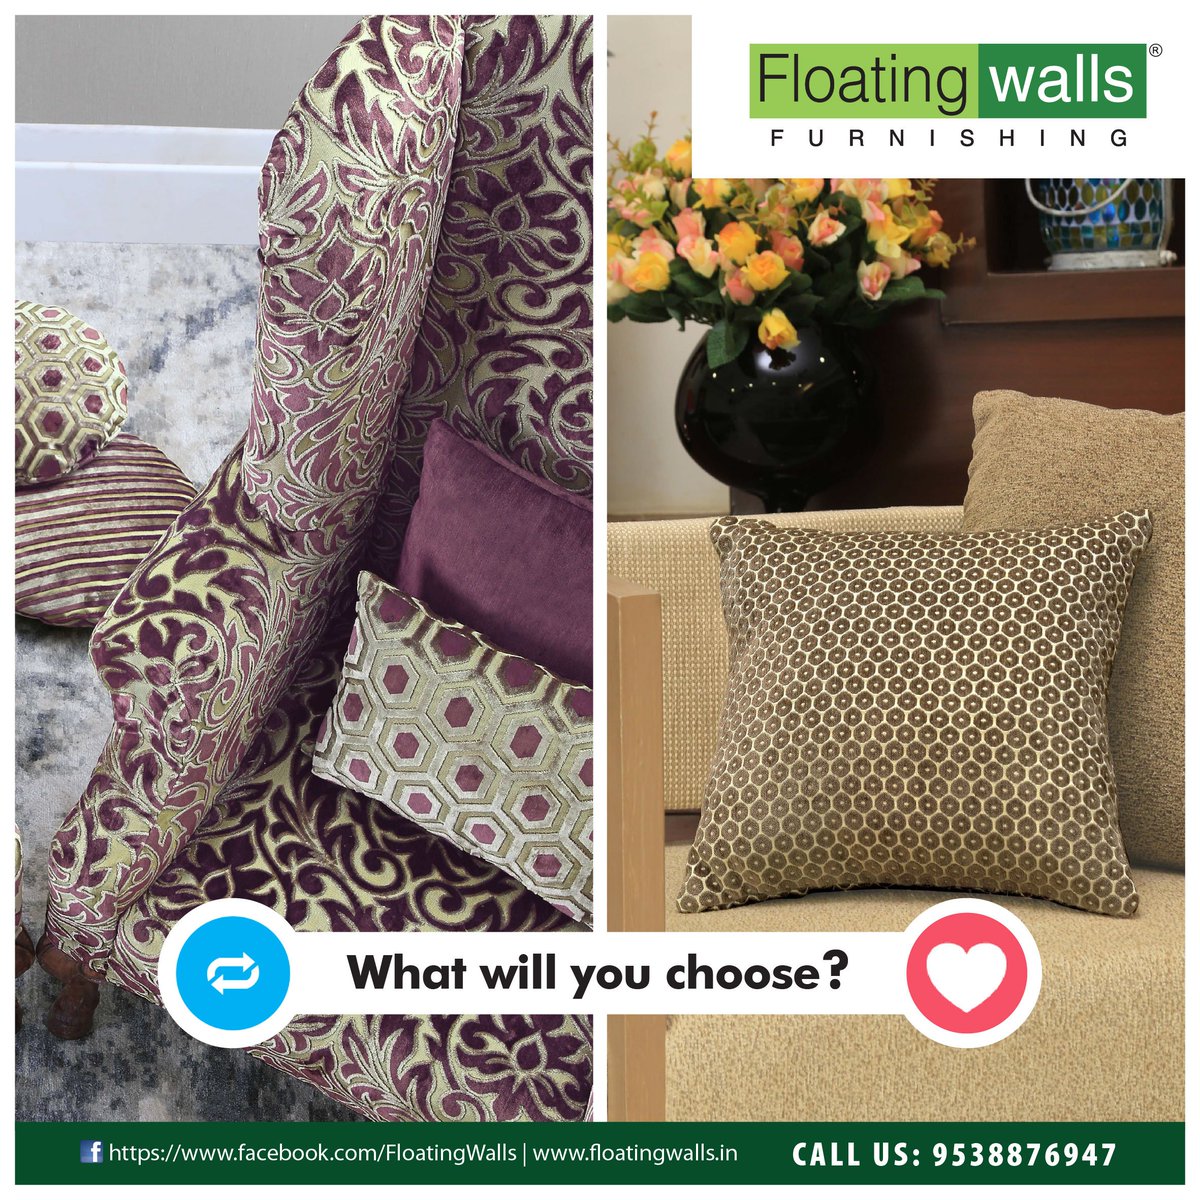 Which one will you select for your home?

#upholsterydesign #homedecor #floatingwalls #like